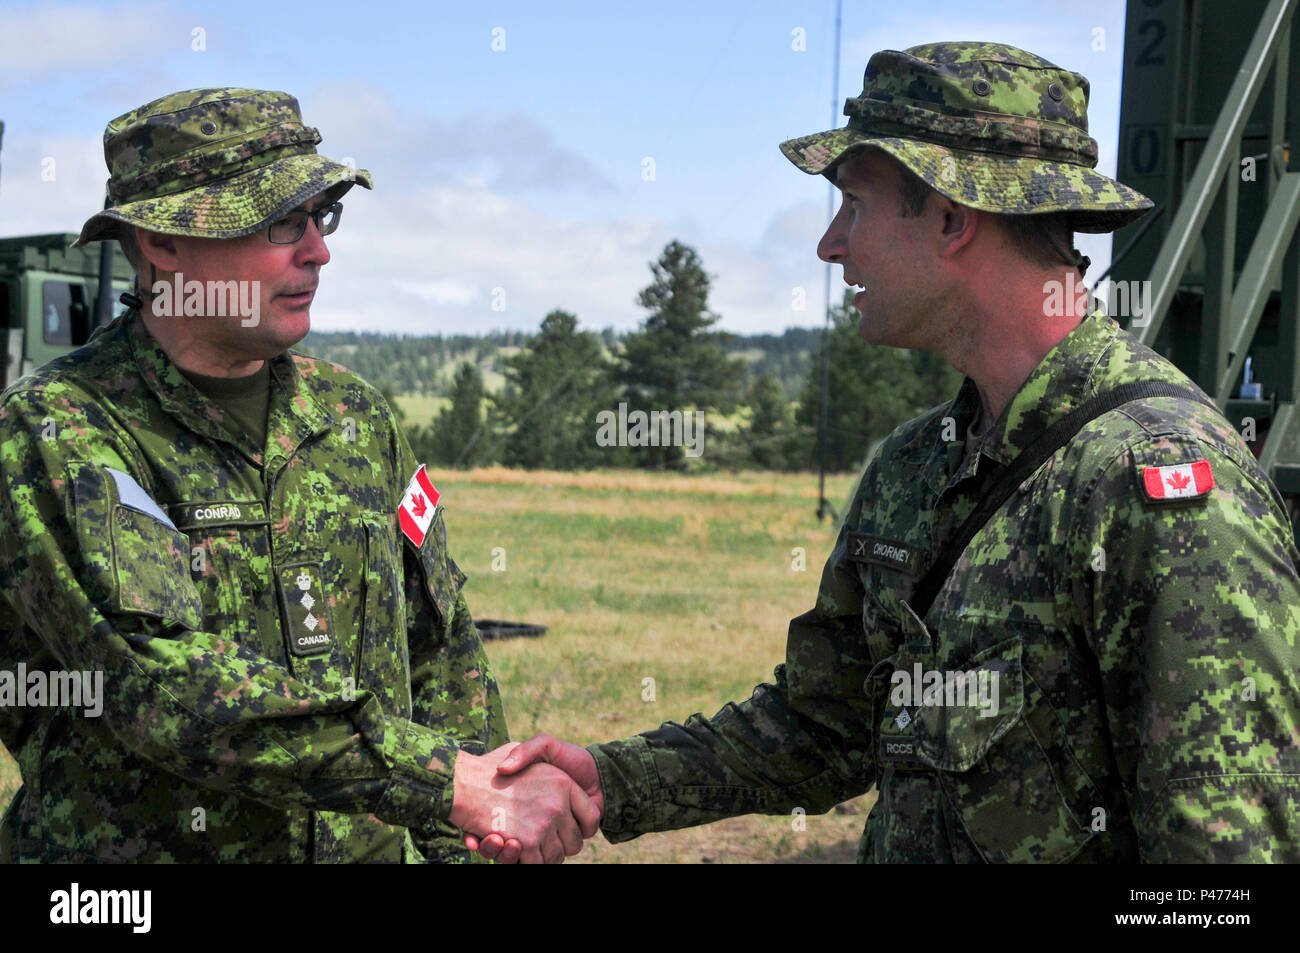 Canadian Army Col. John Conrad, commander of the 41 Canadian Brigade Group meets with Canadian Army 2nd Lt. Drew Chorney of the 41 Signals Regiment out of Calgary, Alberta as part of Golden Coyote at Forward Operating Base Custer, Custer, S.D., June 15 2016. The Golden Coyote exercise is a three-phase, scenario-driven exercise conducted in the Black Hills of South Dakota and Wyoming, which enables commanders to focus on mission essential task requirements, warrior tasks and battle drills. (U.S. Army photo by Spc. Robert West /Released) Stock Photo